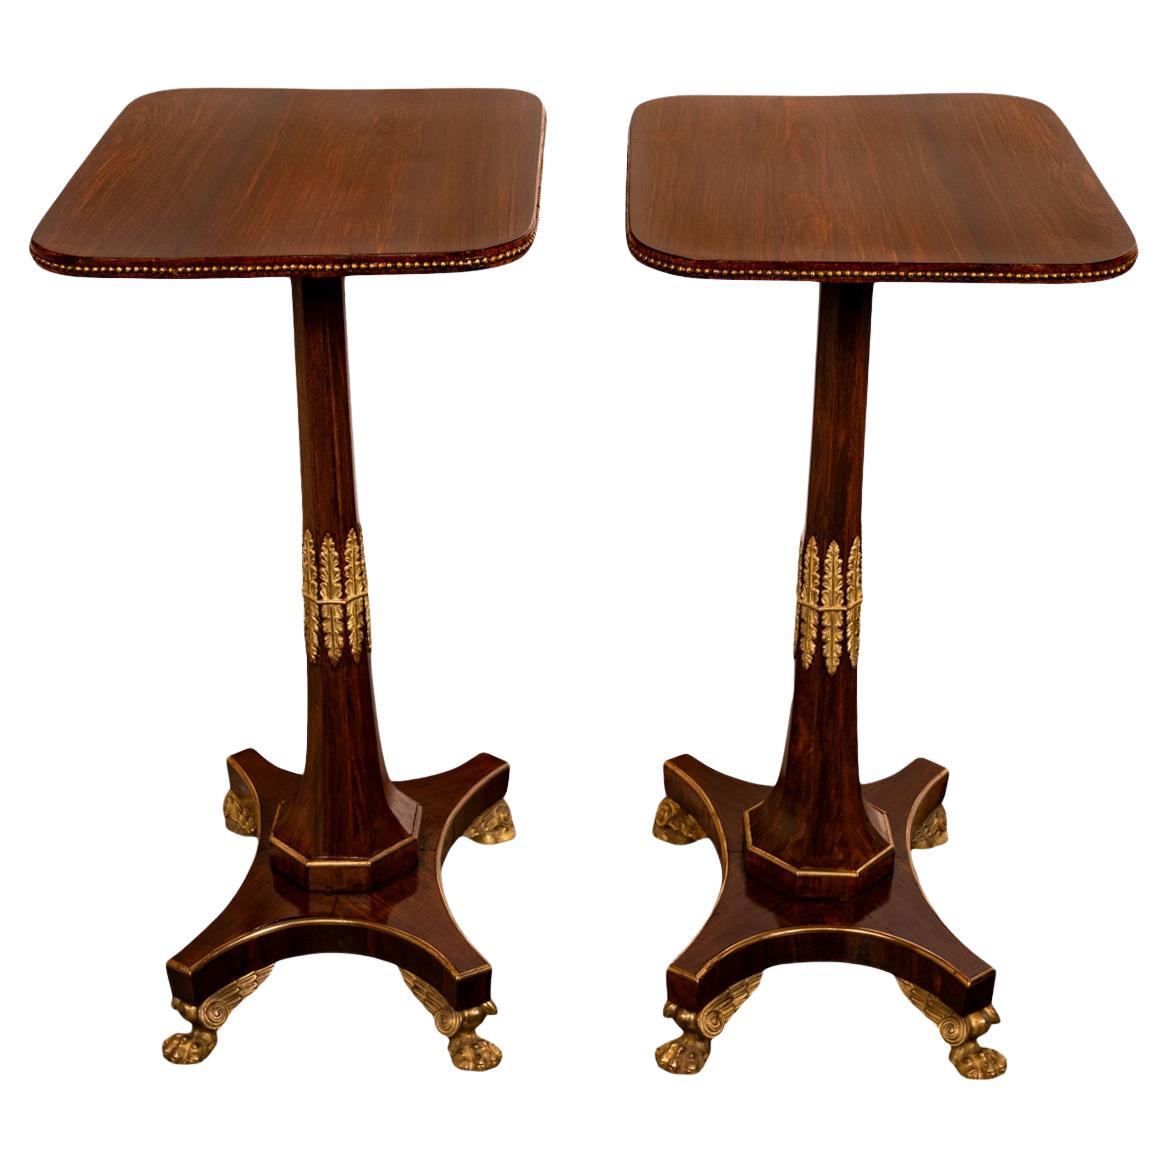 A fine & elegant pair of antique French Empire Napoleonic period rosewood and ormolu pedestal side/lamp tables, circa 1805.
Each table having a rectangular top with a beaded ormolu band to the edge, the tables having tapered octagonal pedestals